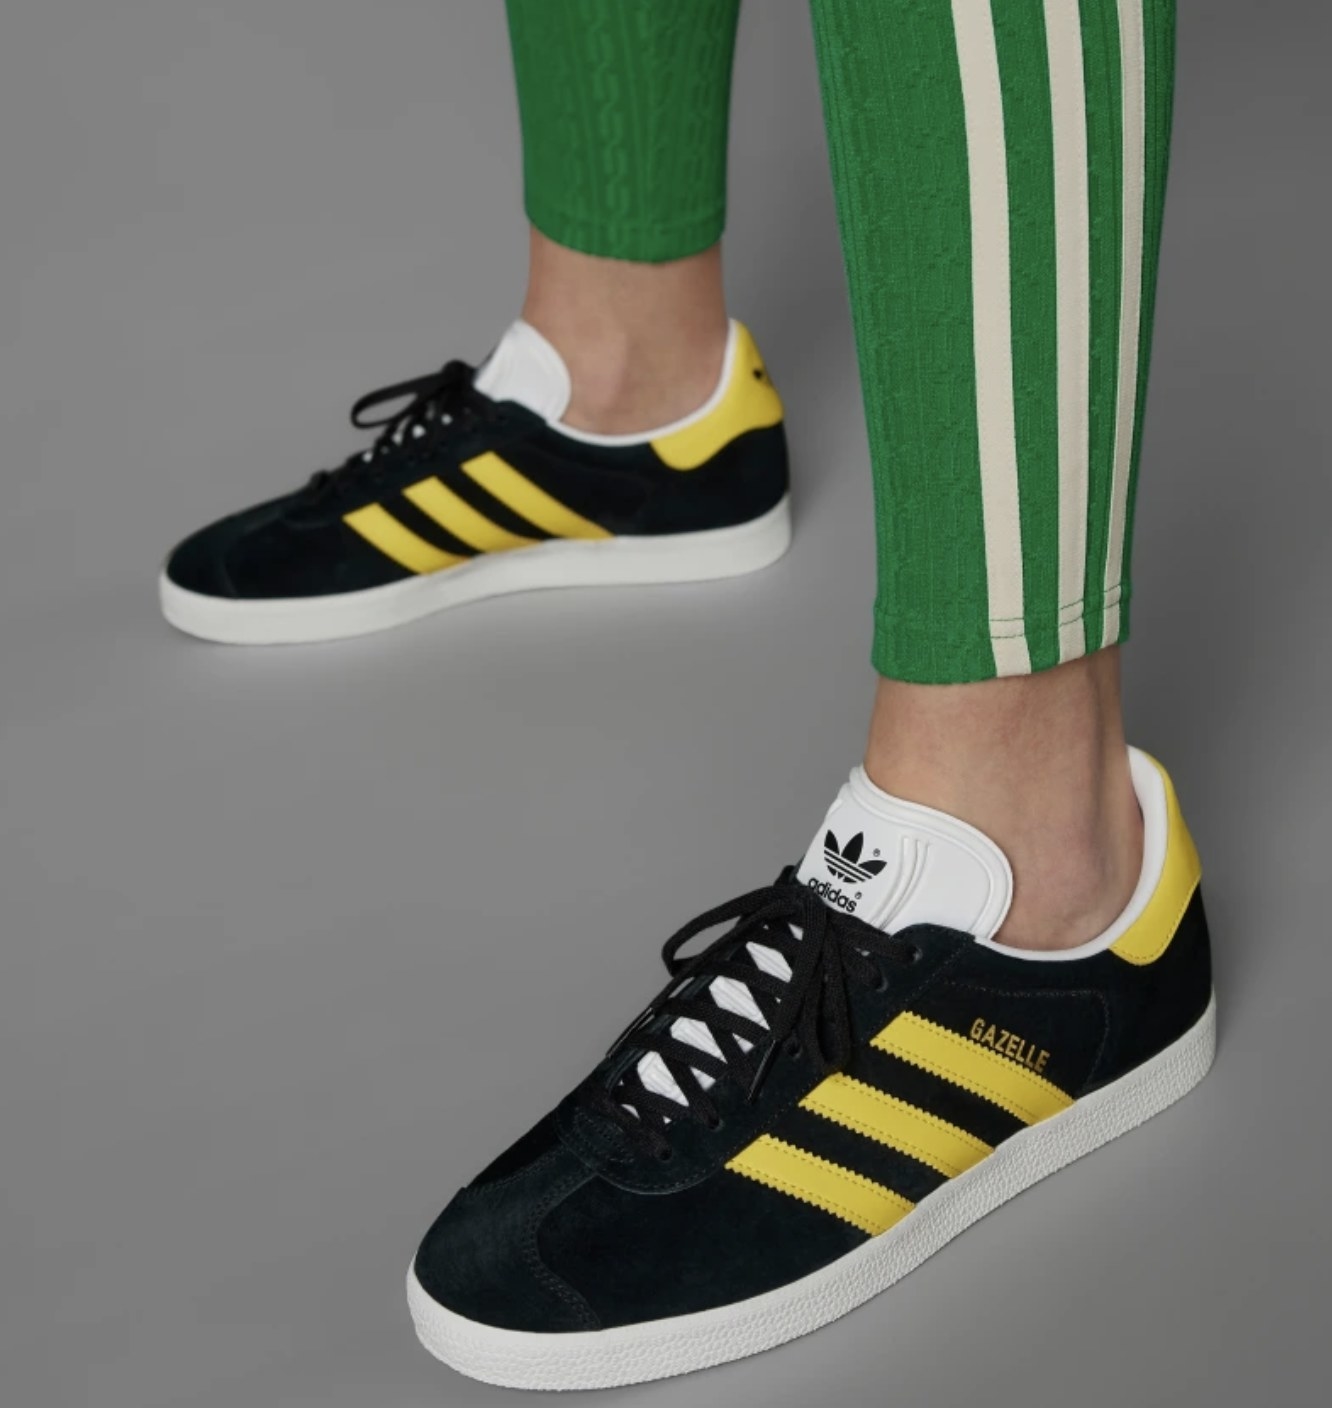 A pair of black sneakers with yellow stripes